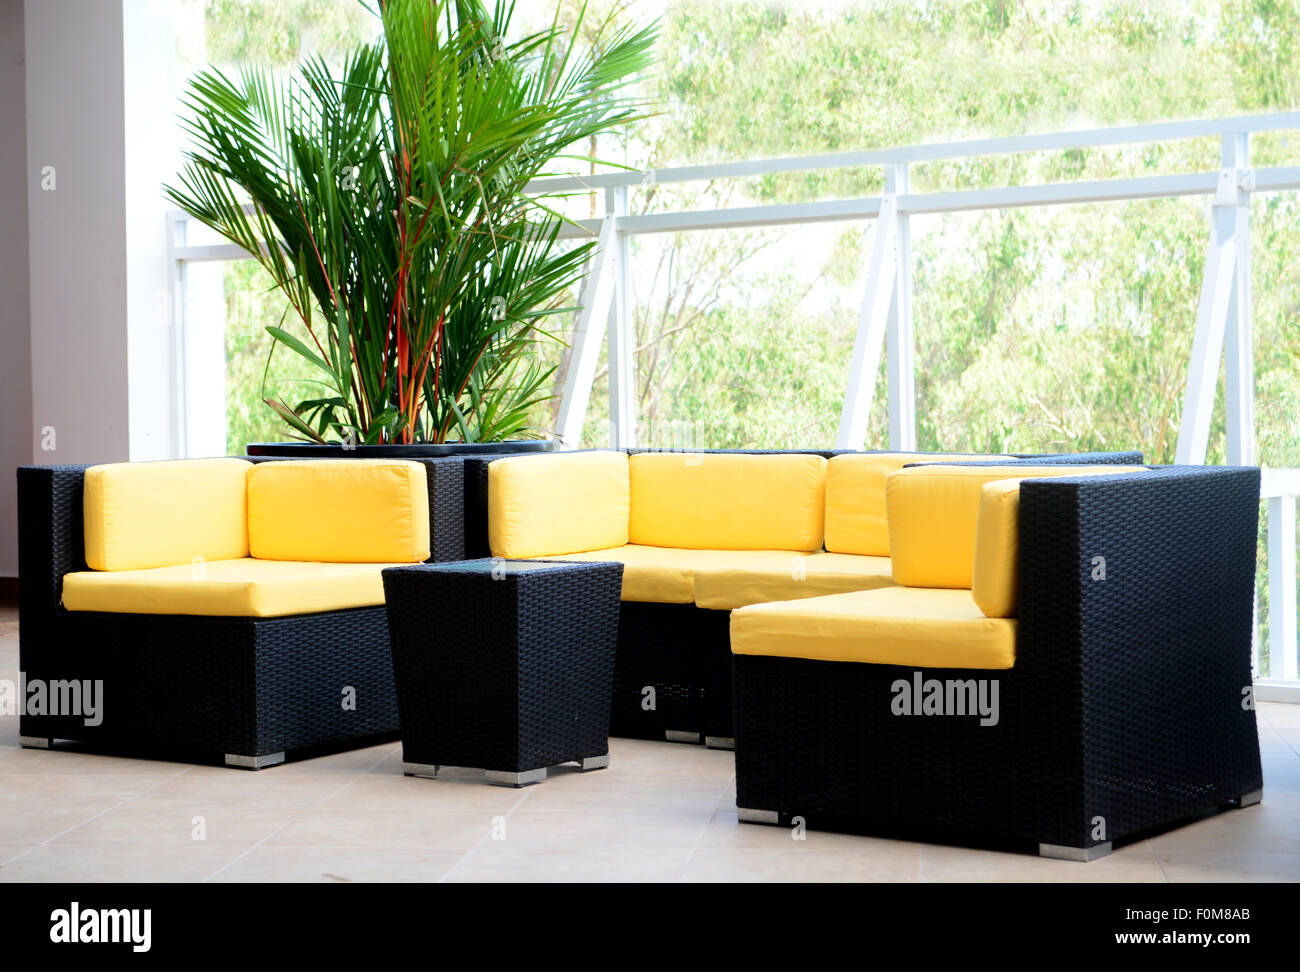 Hotel deck interior furniture with black sofa and chairs and yellow pillows Stock Photo